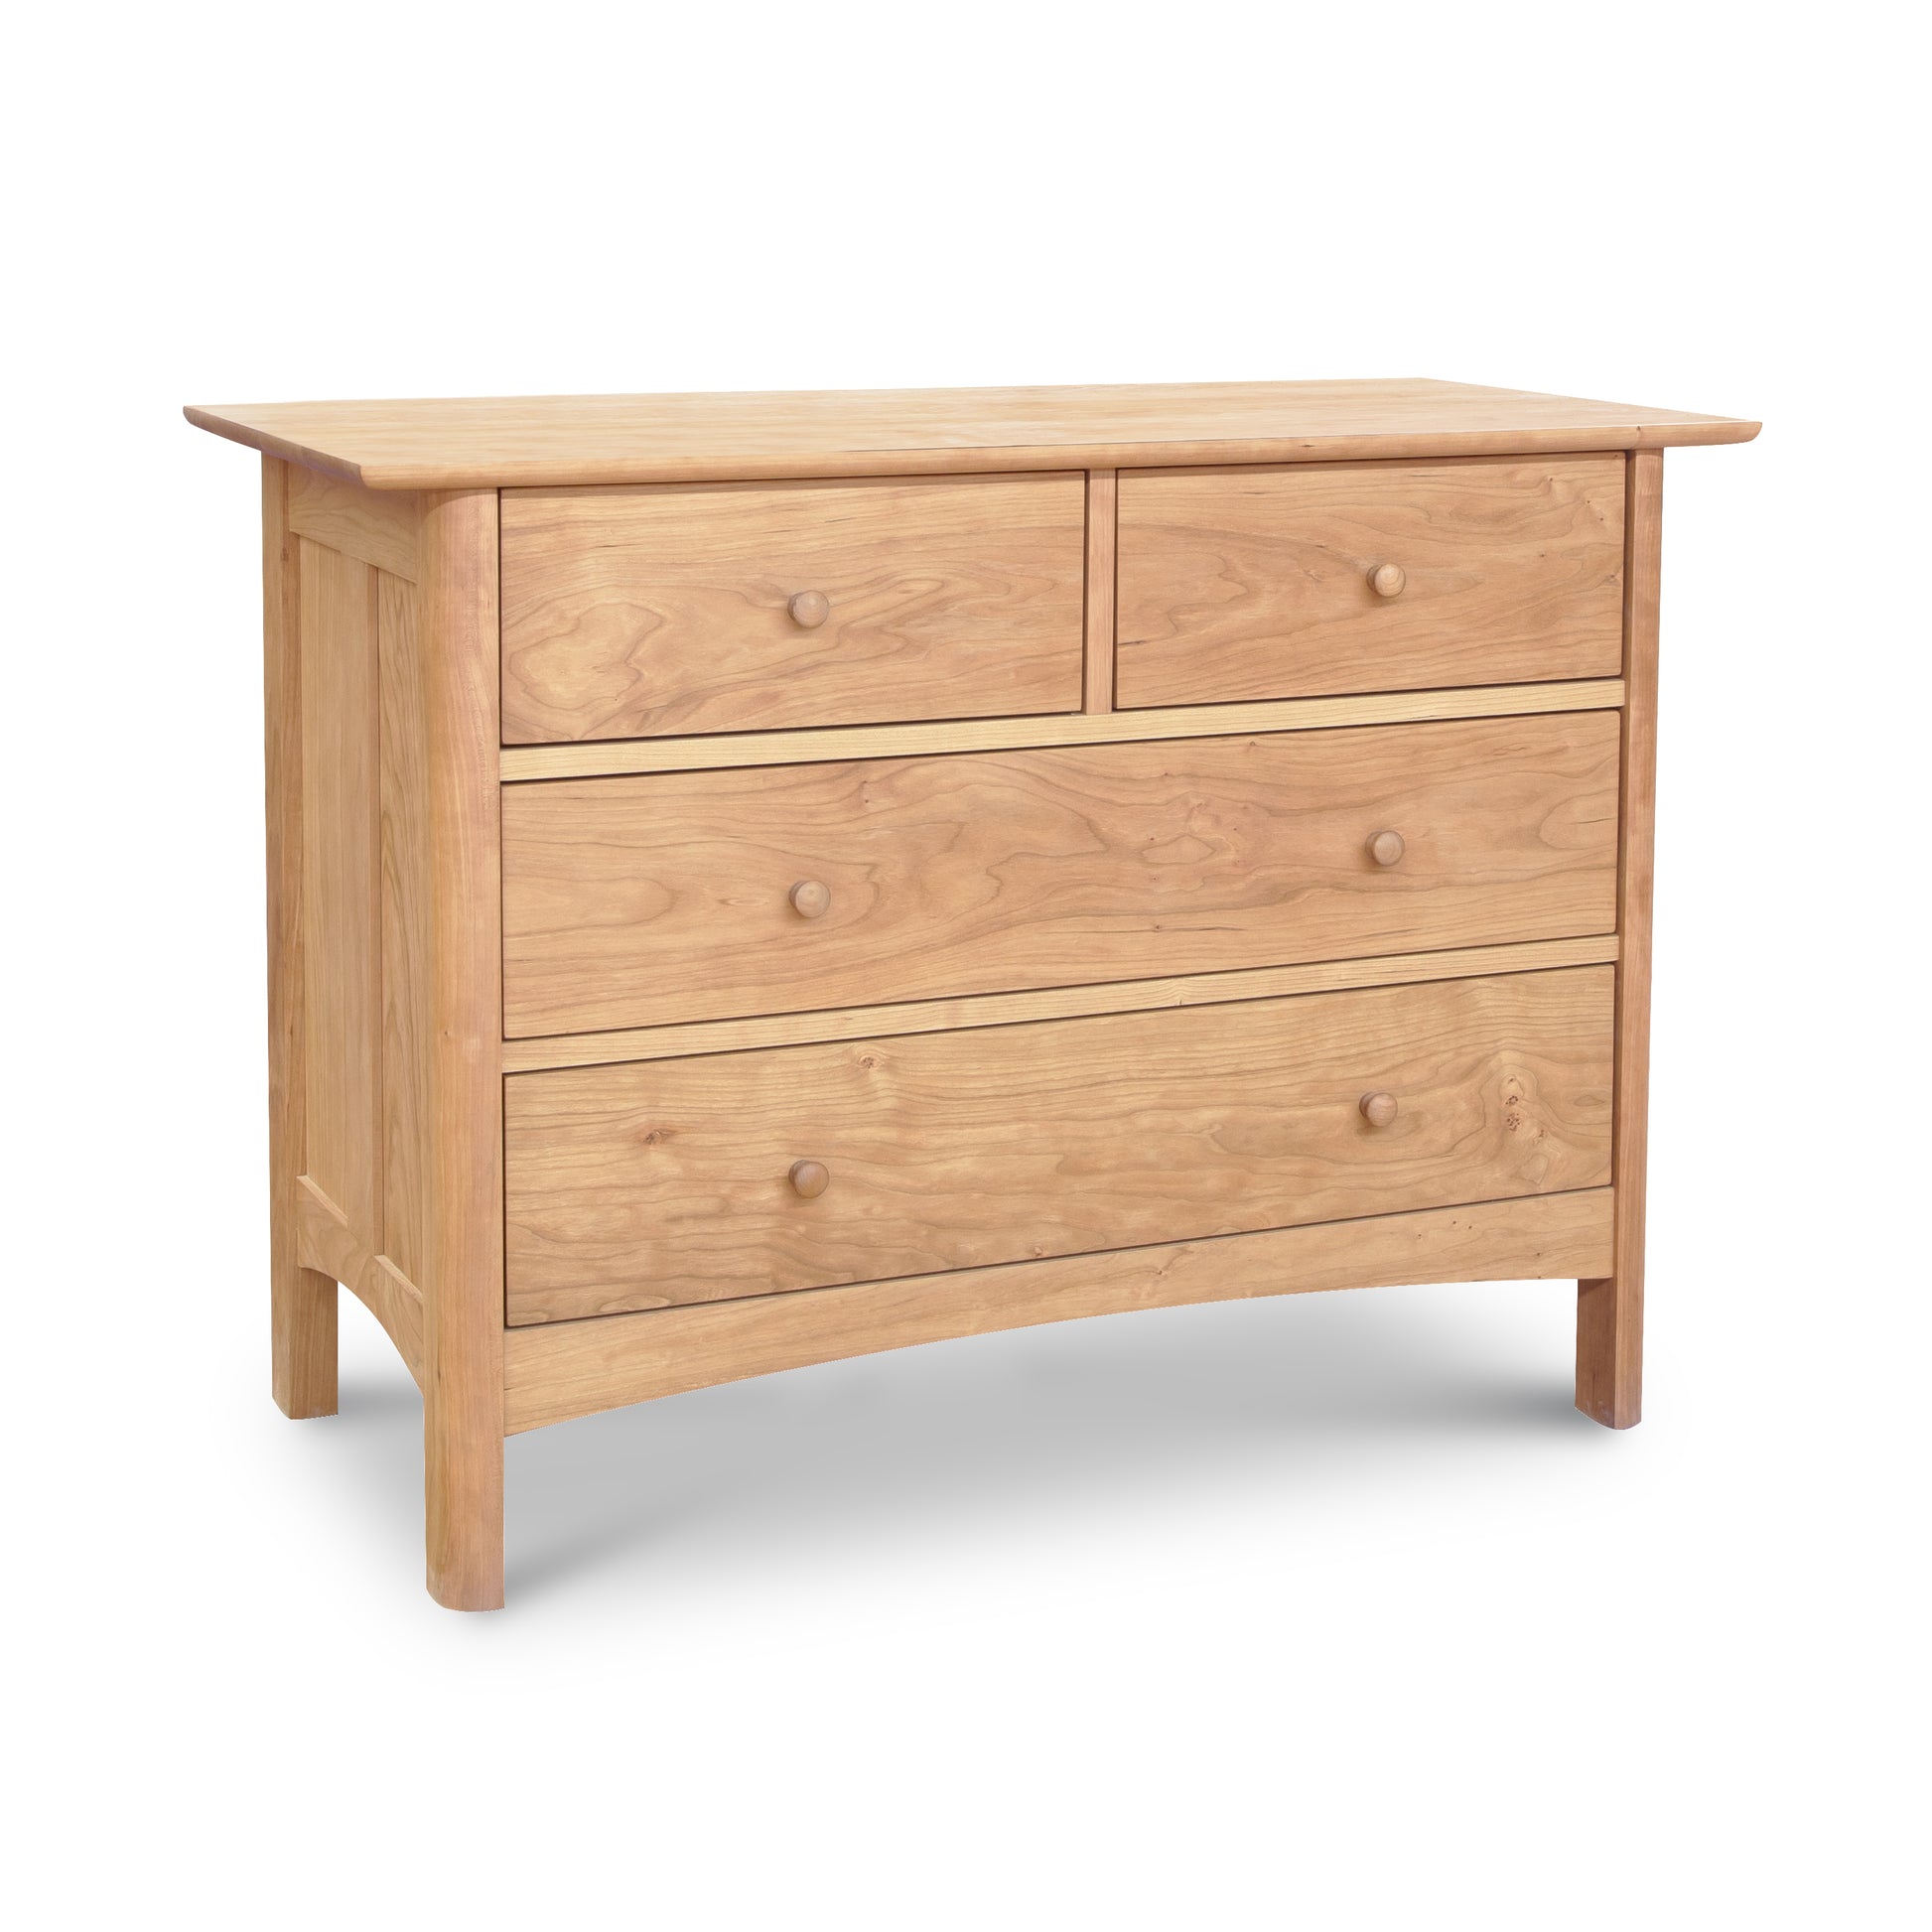 Heartwood Shaker 4-Drawer Dresser by Vermont Furniture Designs, isolated on a white background.